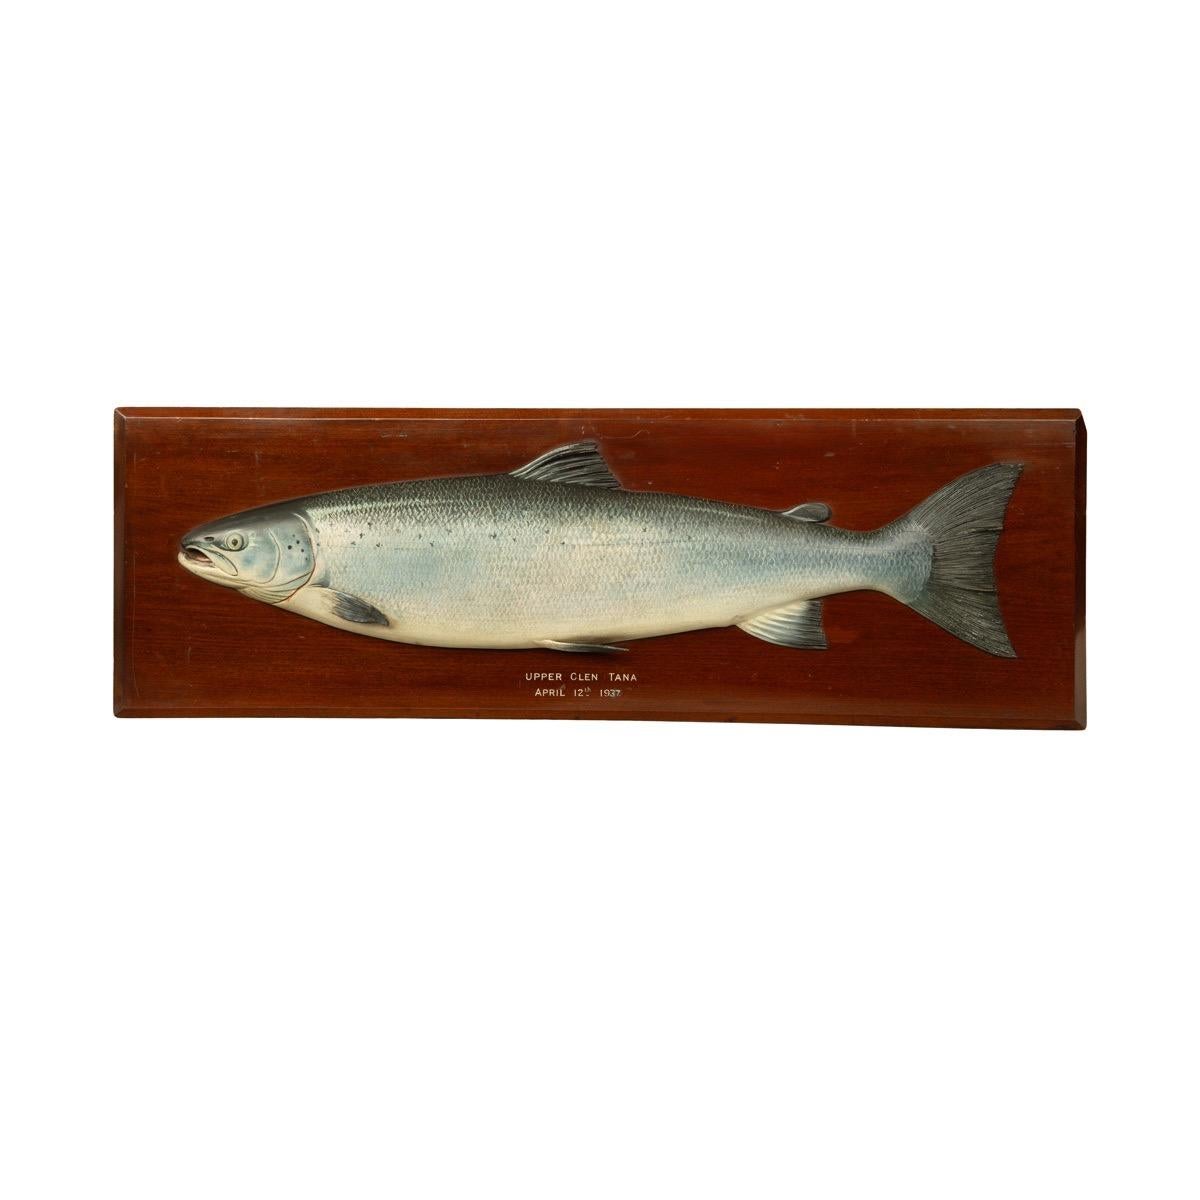 A painted wooden model of a prize winning salmon by C. Farlow, meticulously painted in polychrome and set on a mahogany backboard inscribed ‘Upper Glen Tana, April 12th 1937’, from the size of the model the fish would have weighed approximately 25